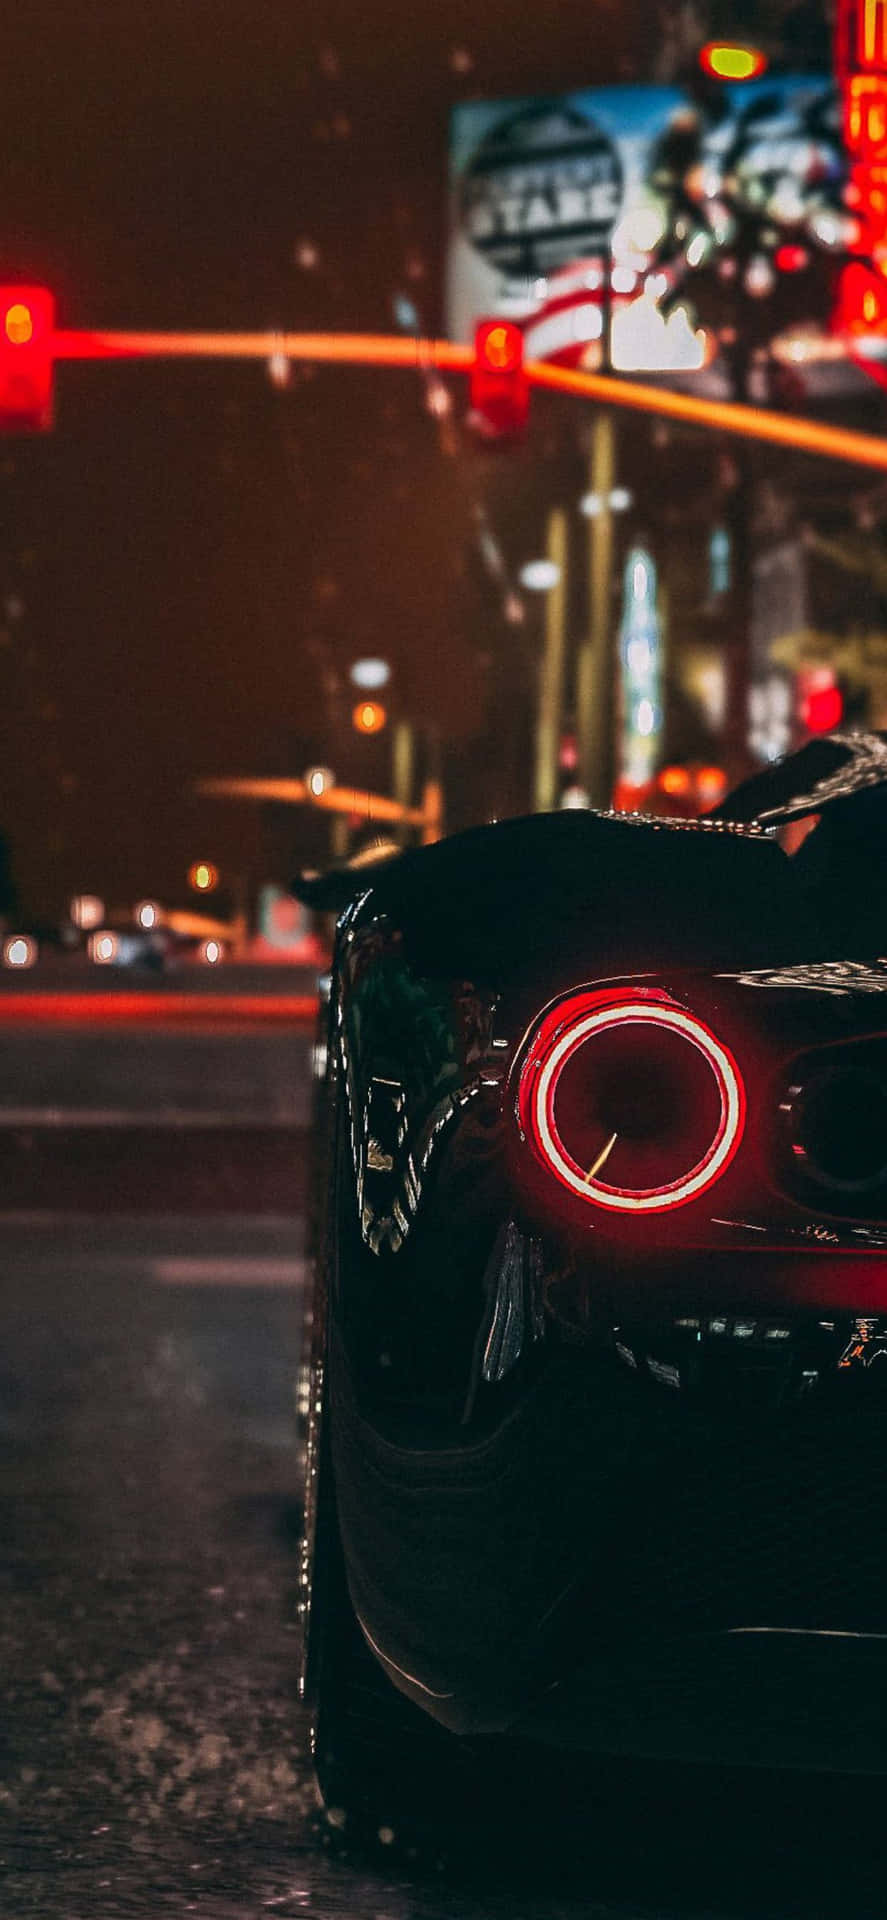 Iphone Xs Max Grand Theft Auto V Background Black Car On A Traffic Light